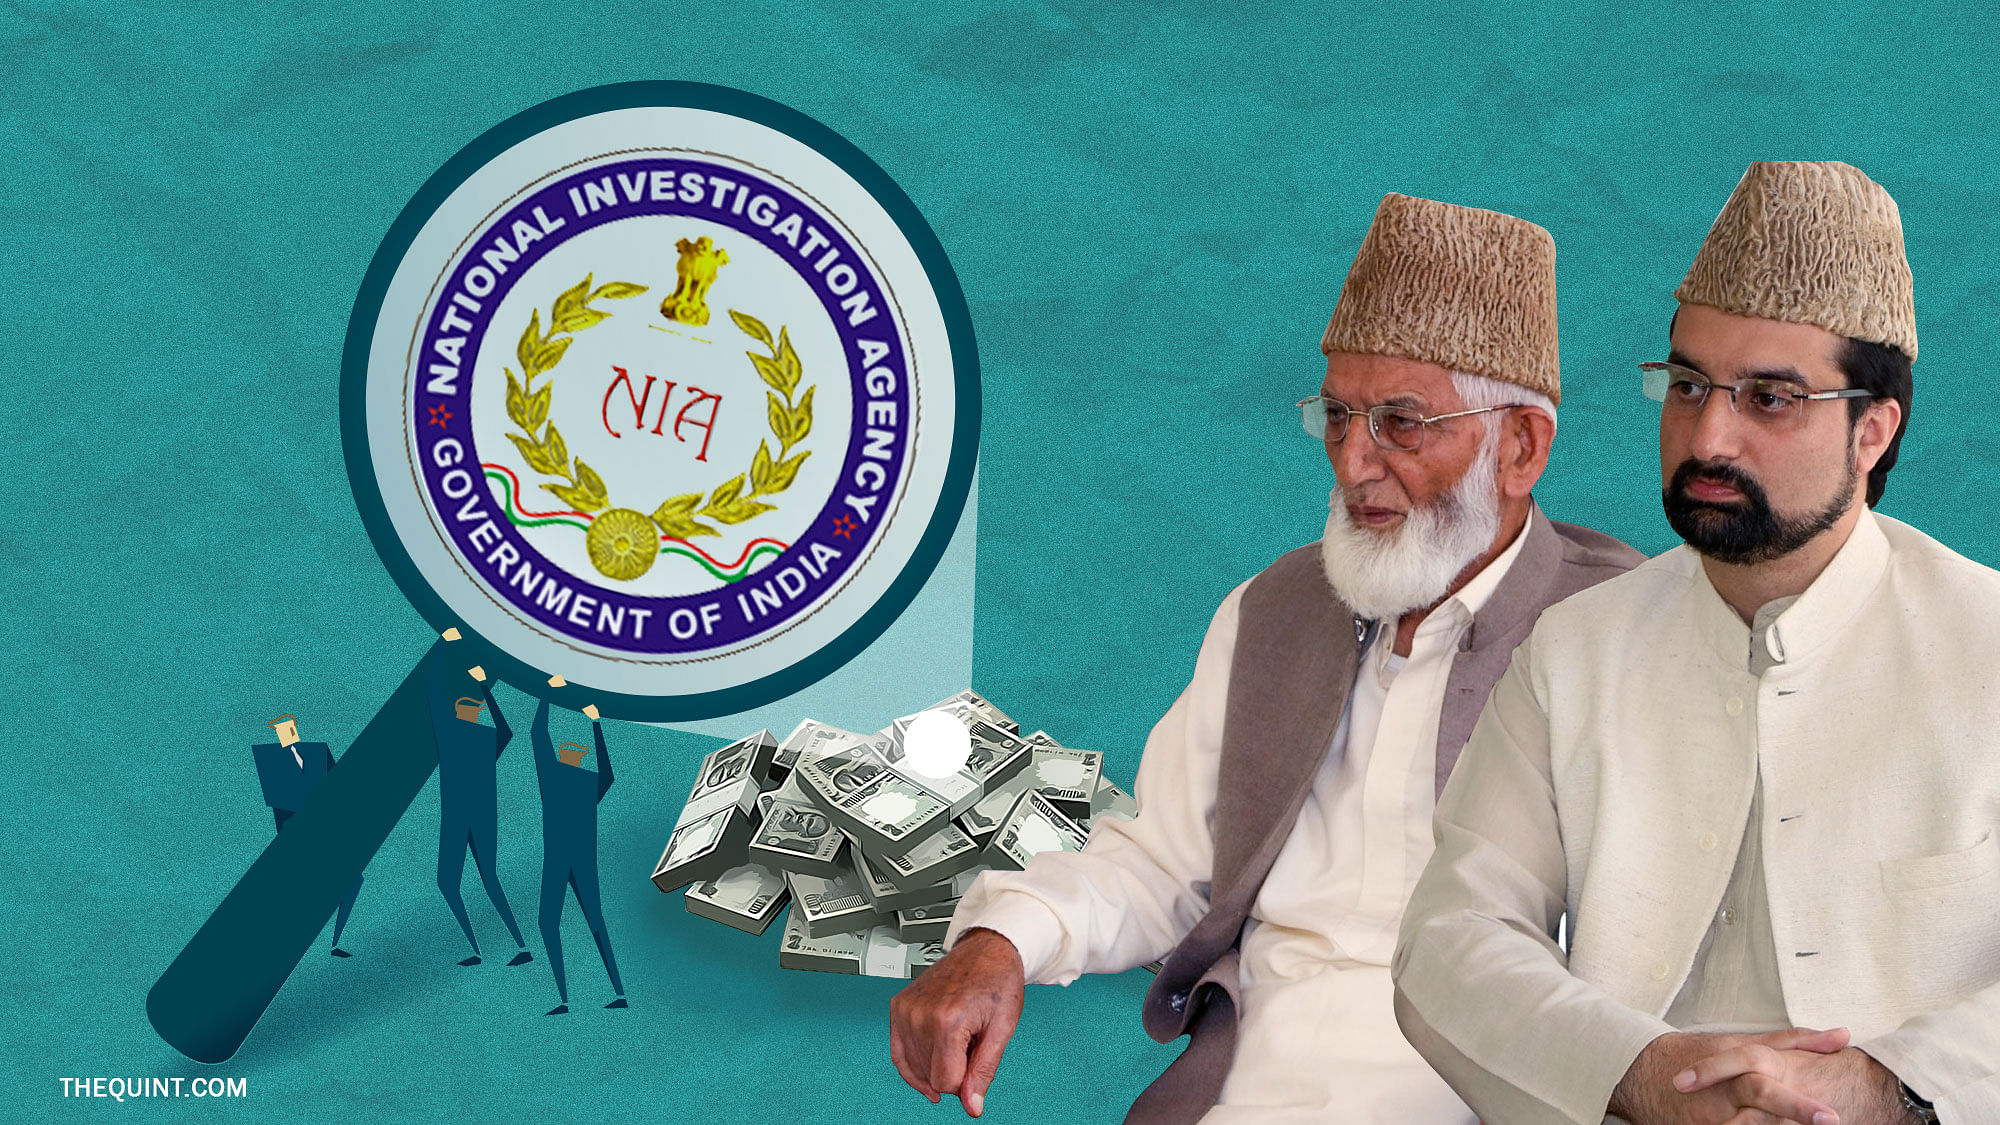 Image of Hurriyat leaders linked with terror funding in the Kashmir Valley used for representational purposes.